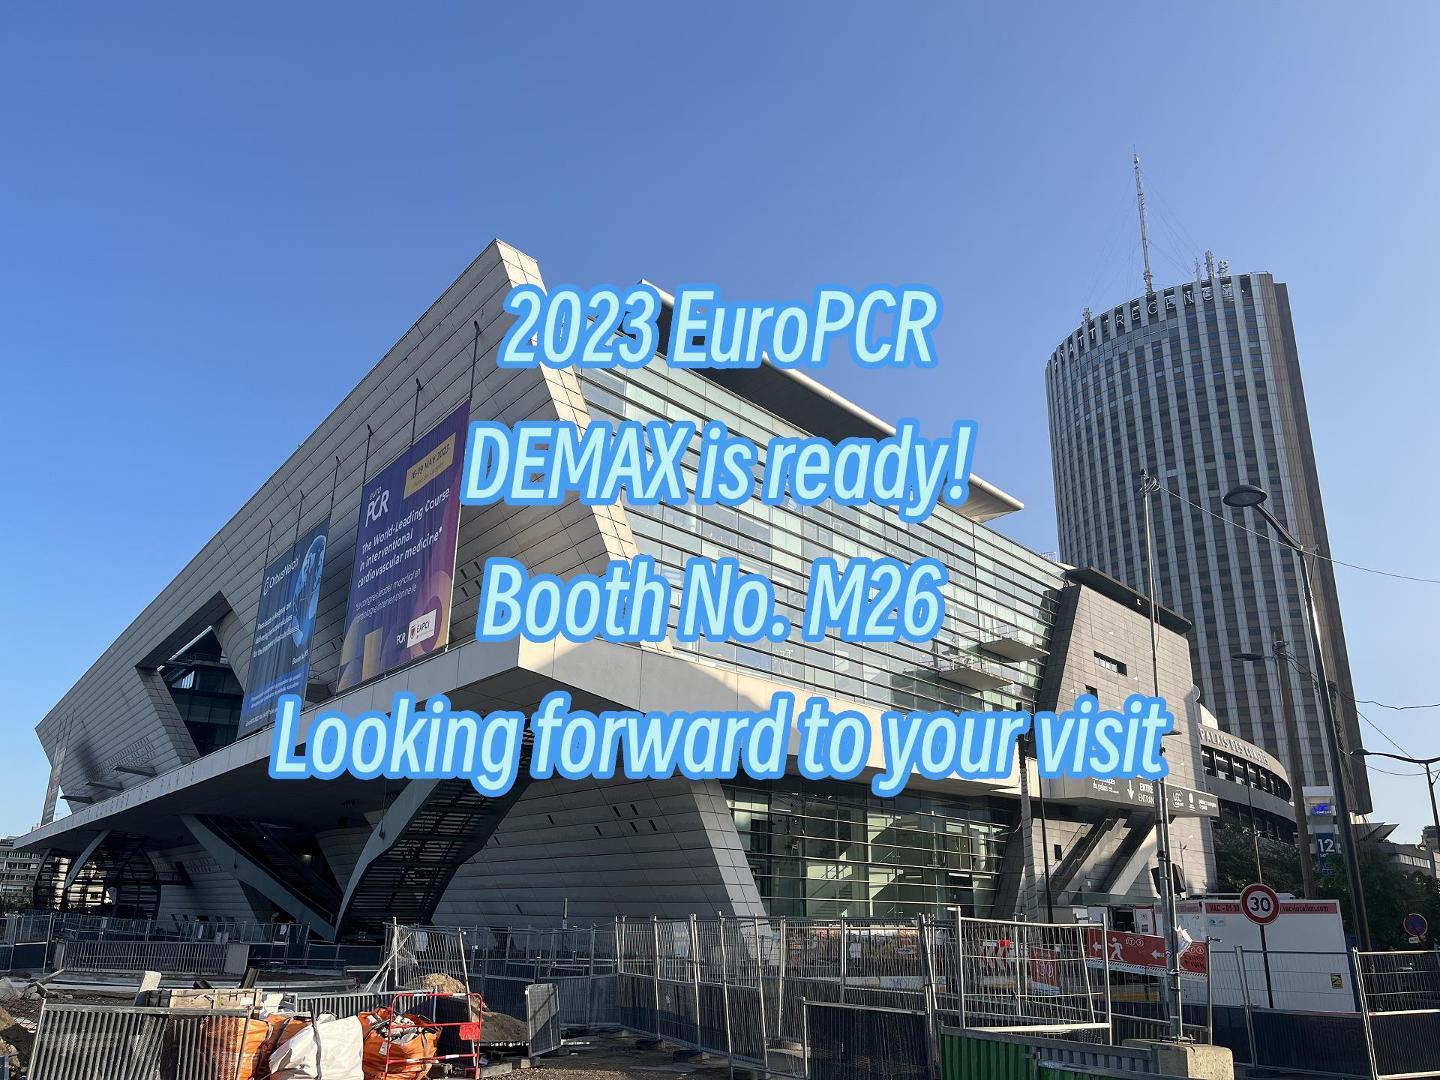 2023EuroPCR is in full swing, and DEMAX heartily await your presence at booth M26